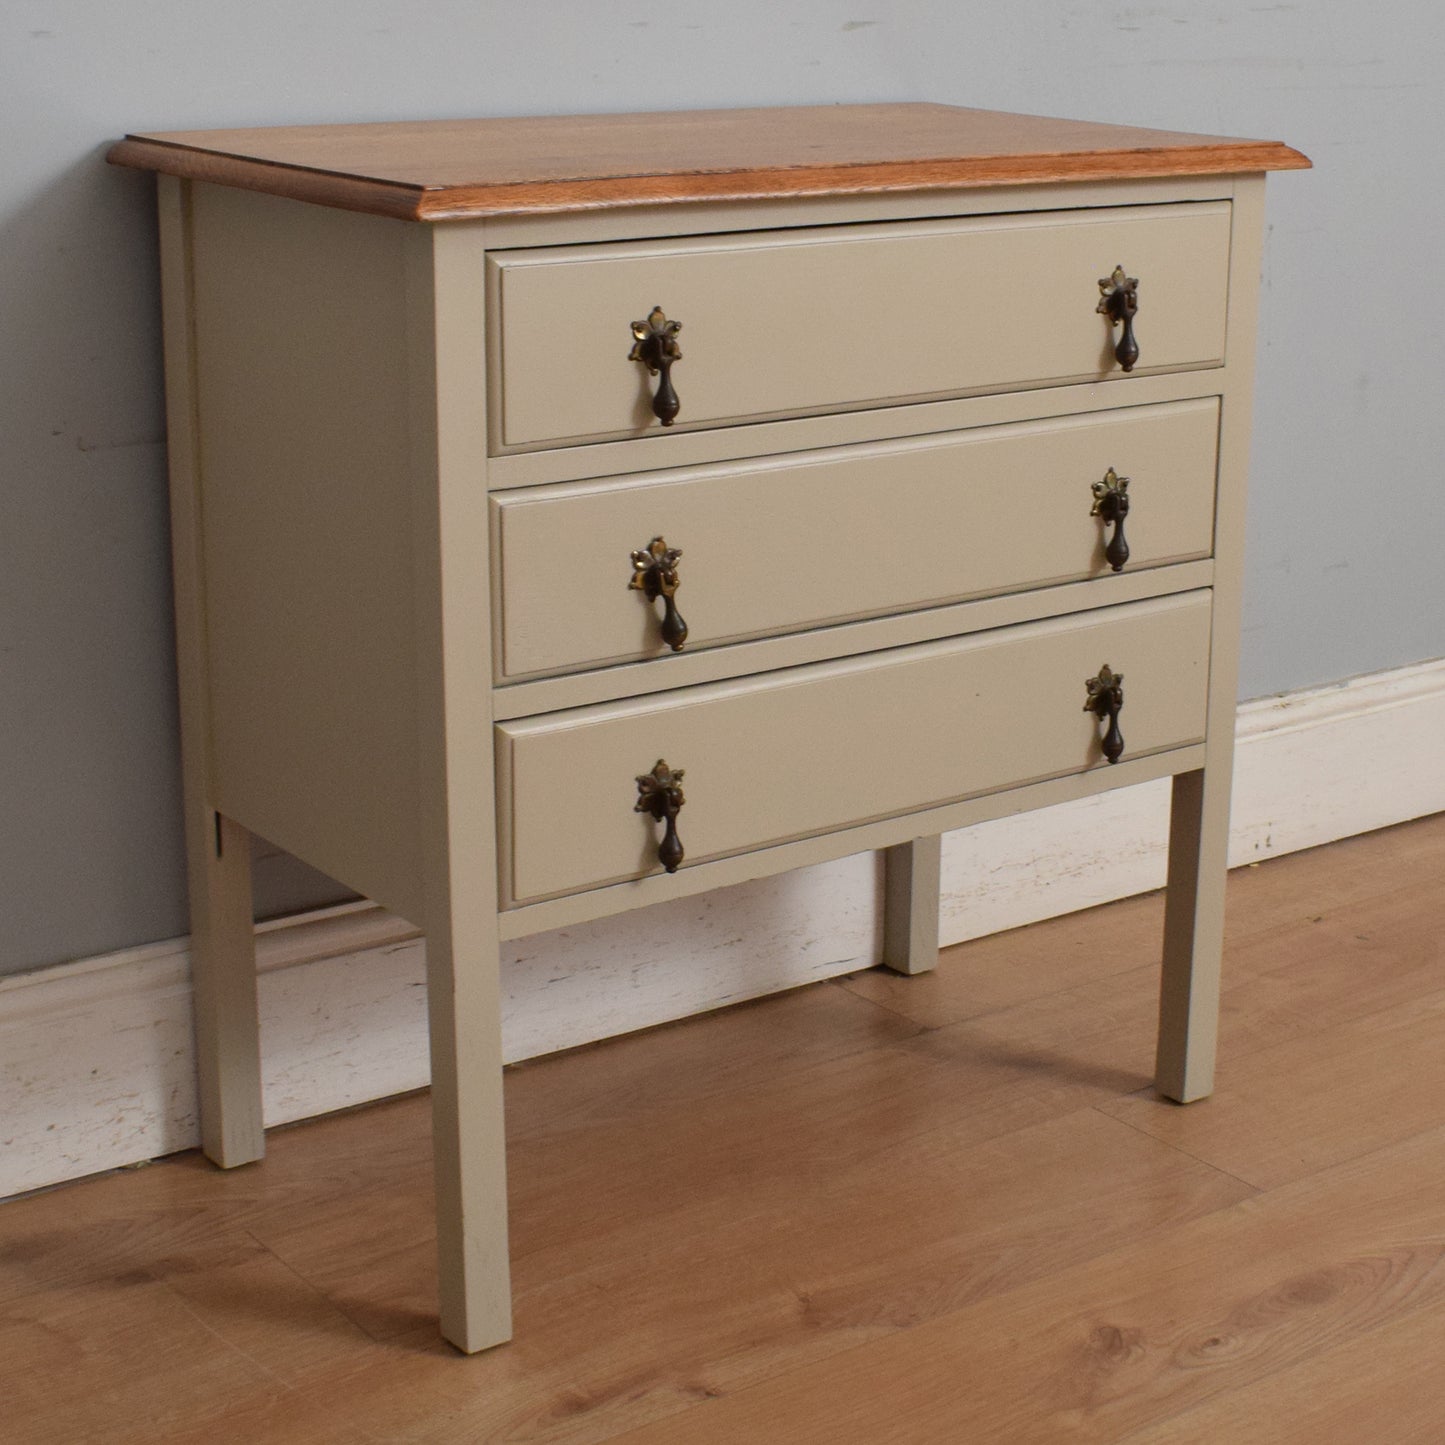 Small Painted Chest of Drawers